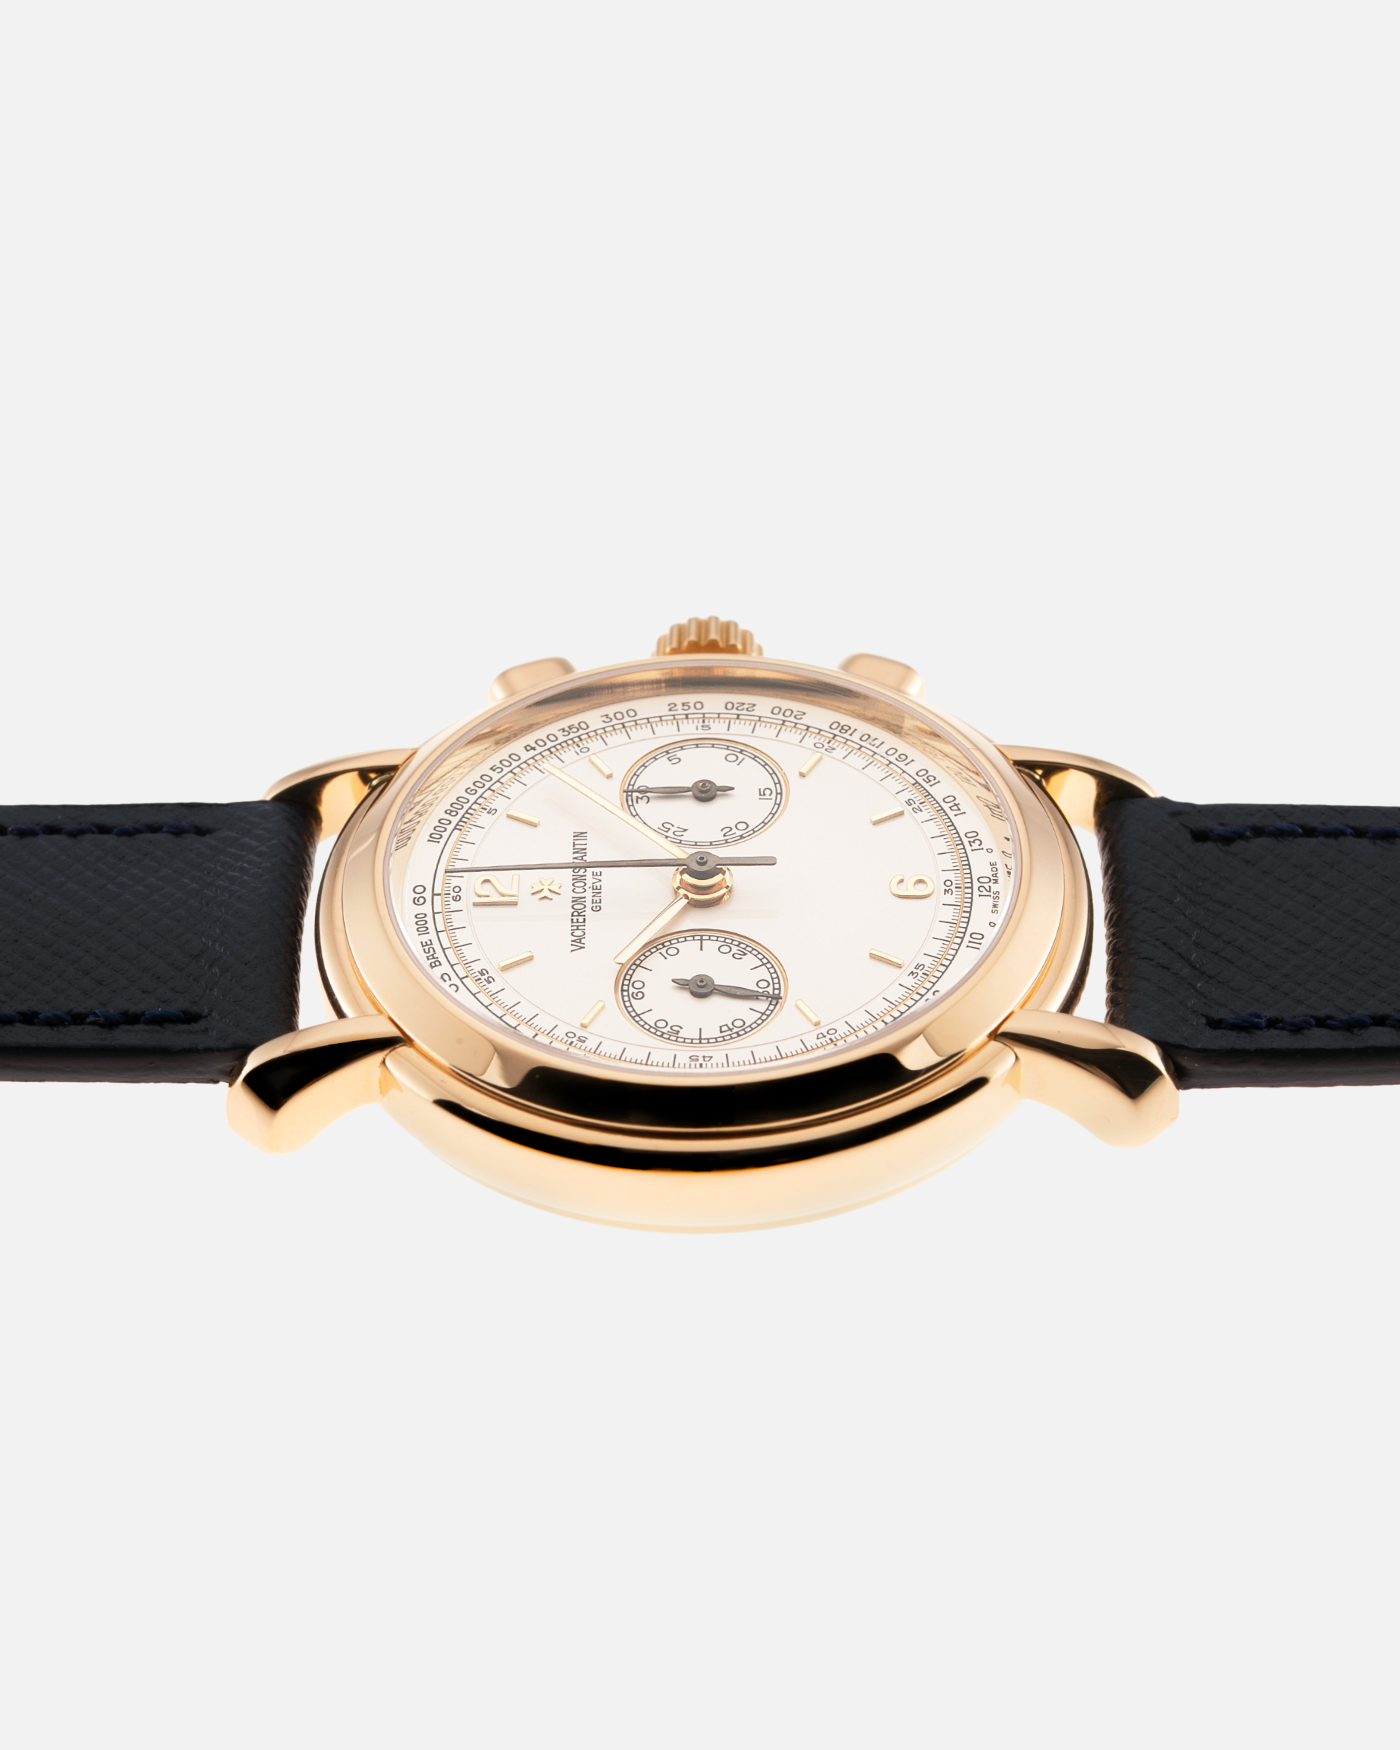 Brand: Vacheron Constantin Year: 1990’s Model: Les Historiques Chronograph  Reference Number: 47101 Material: 18k Yellow Gold Movement: Lemania 2320 Based Cal. 1141 Case Diameter: 37mm Bracelet: Molequin Navy Blue Textured Calf with 18k Yellow Gold Tang Buckle